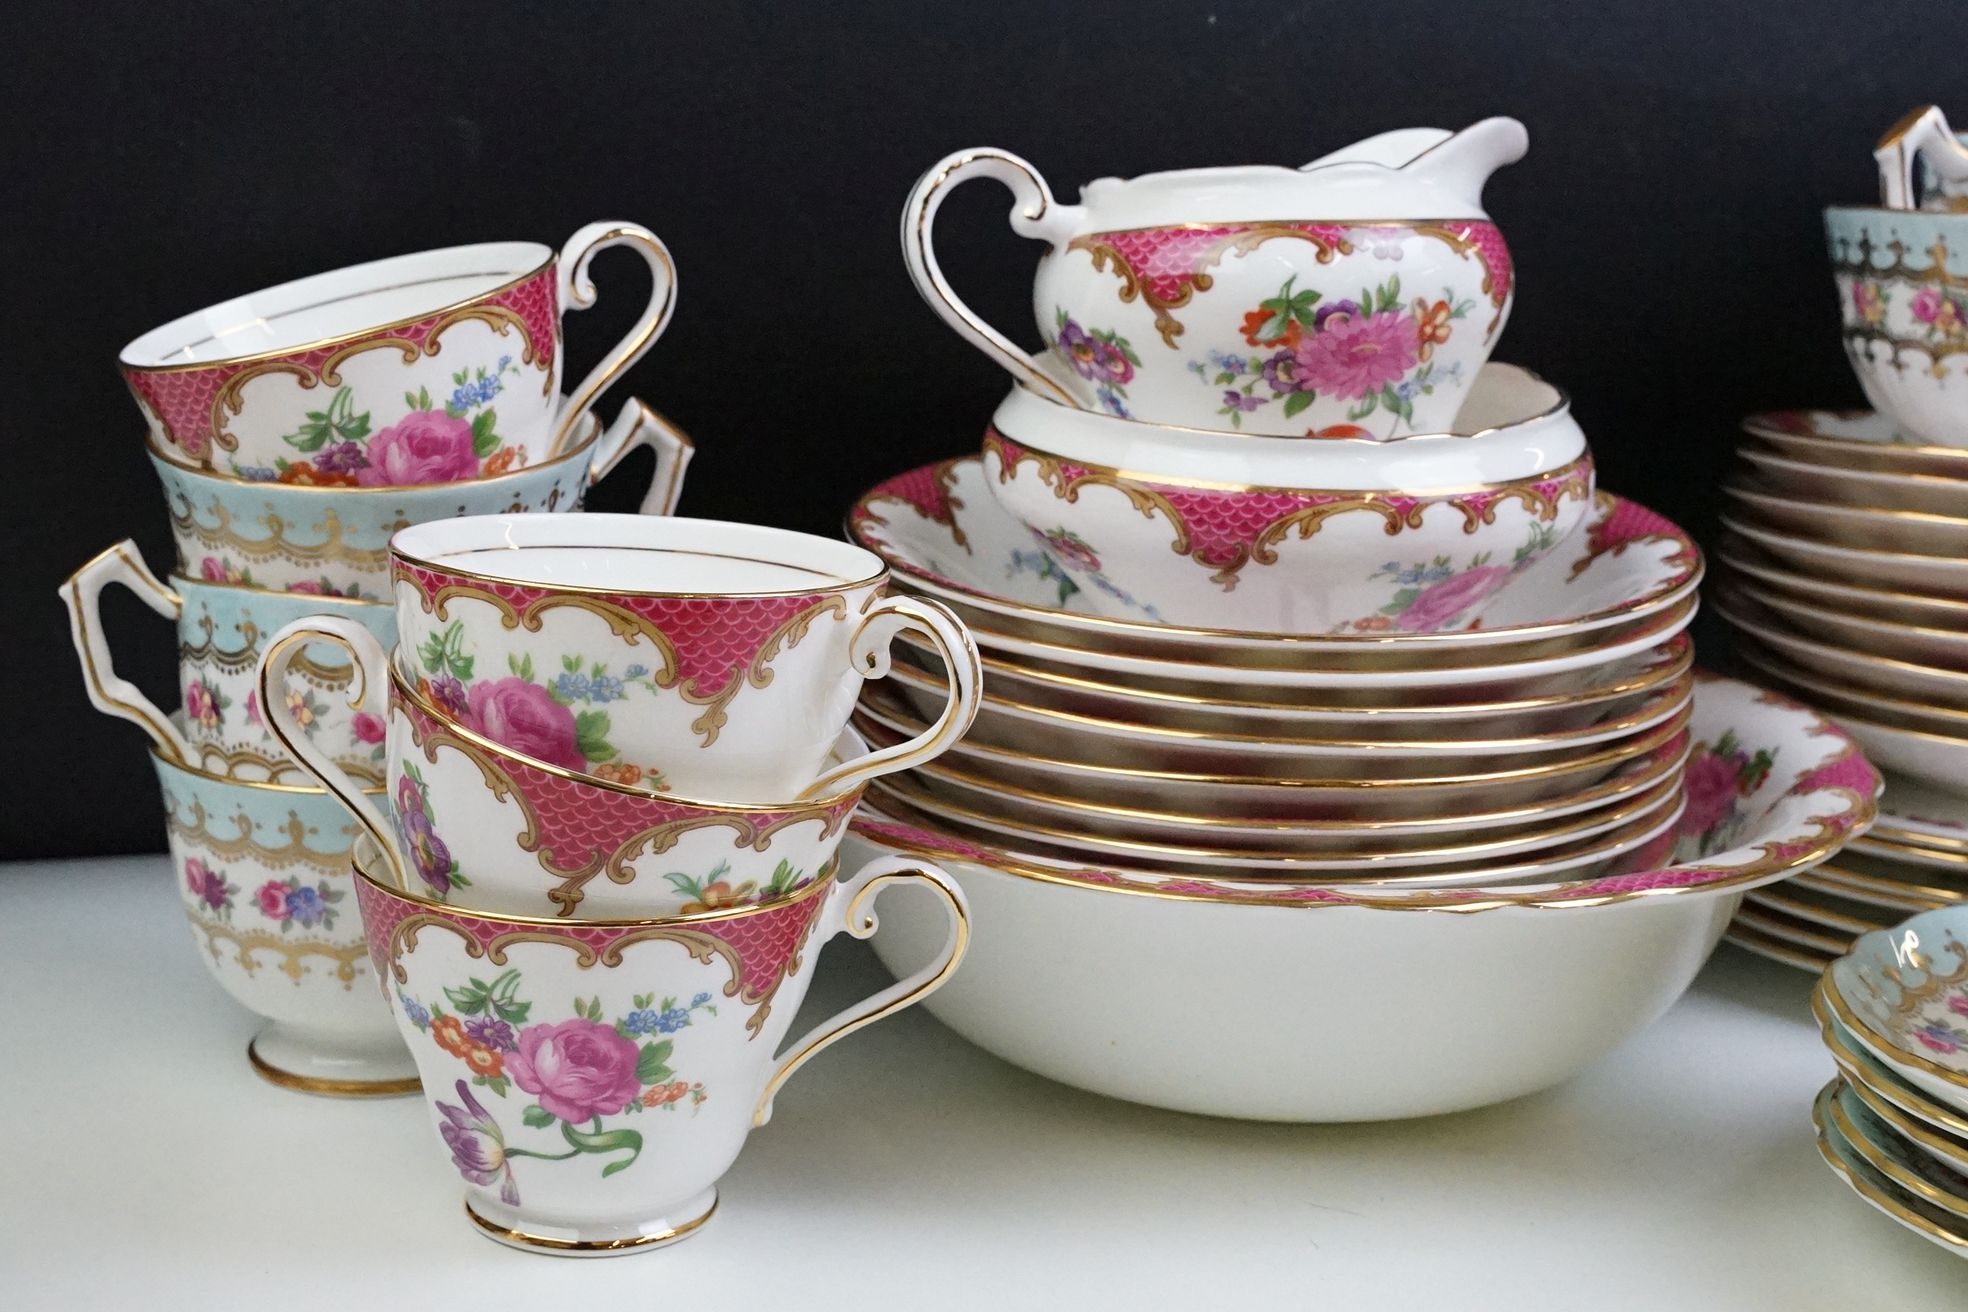 Aynsley porcelain floral tea set, pattern no. B971, to include teapot, 8 cups, 9 saucers, 7 tea - Image 5 of 9